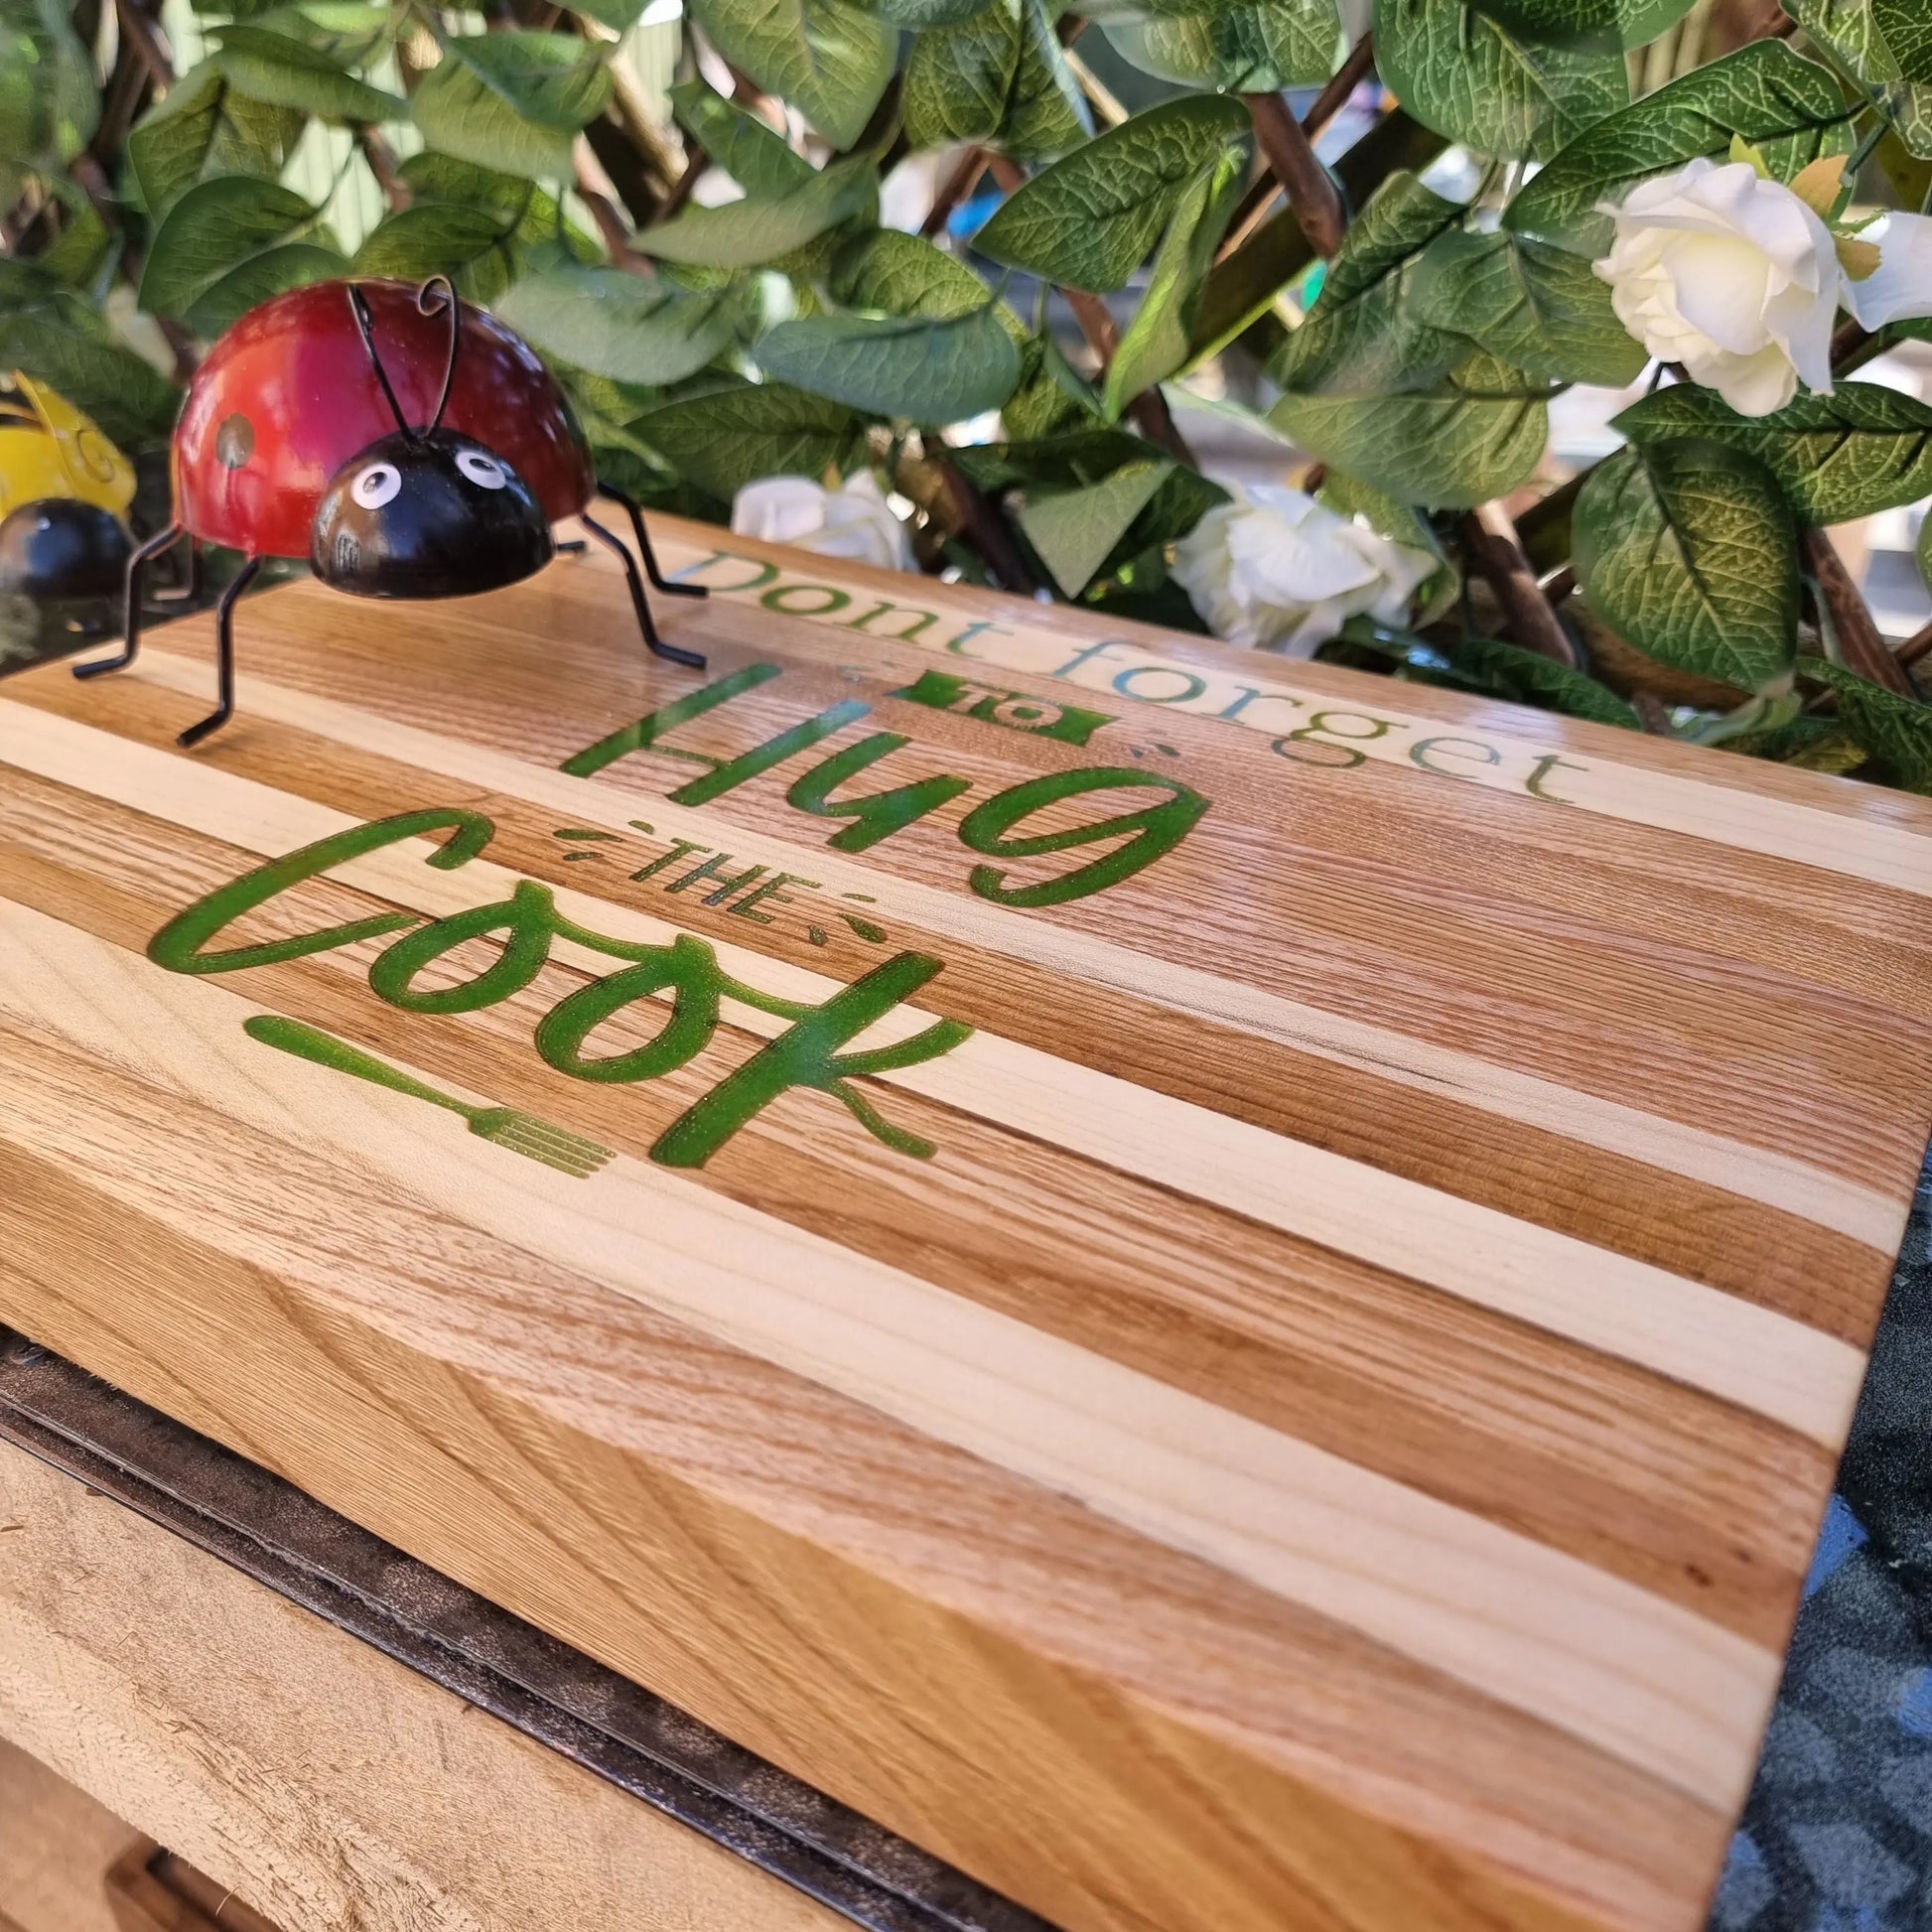 Copy of Ash Chopping Boards Personalised Slogan wisteria woodcraft